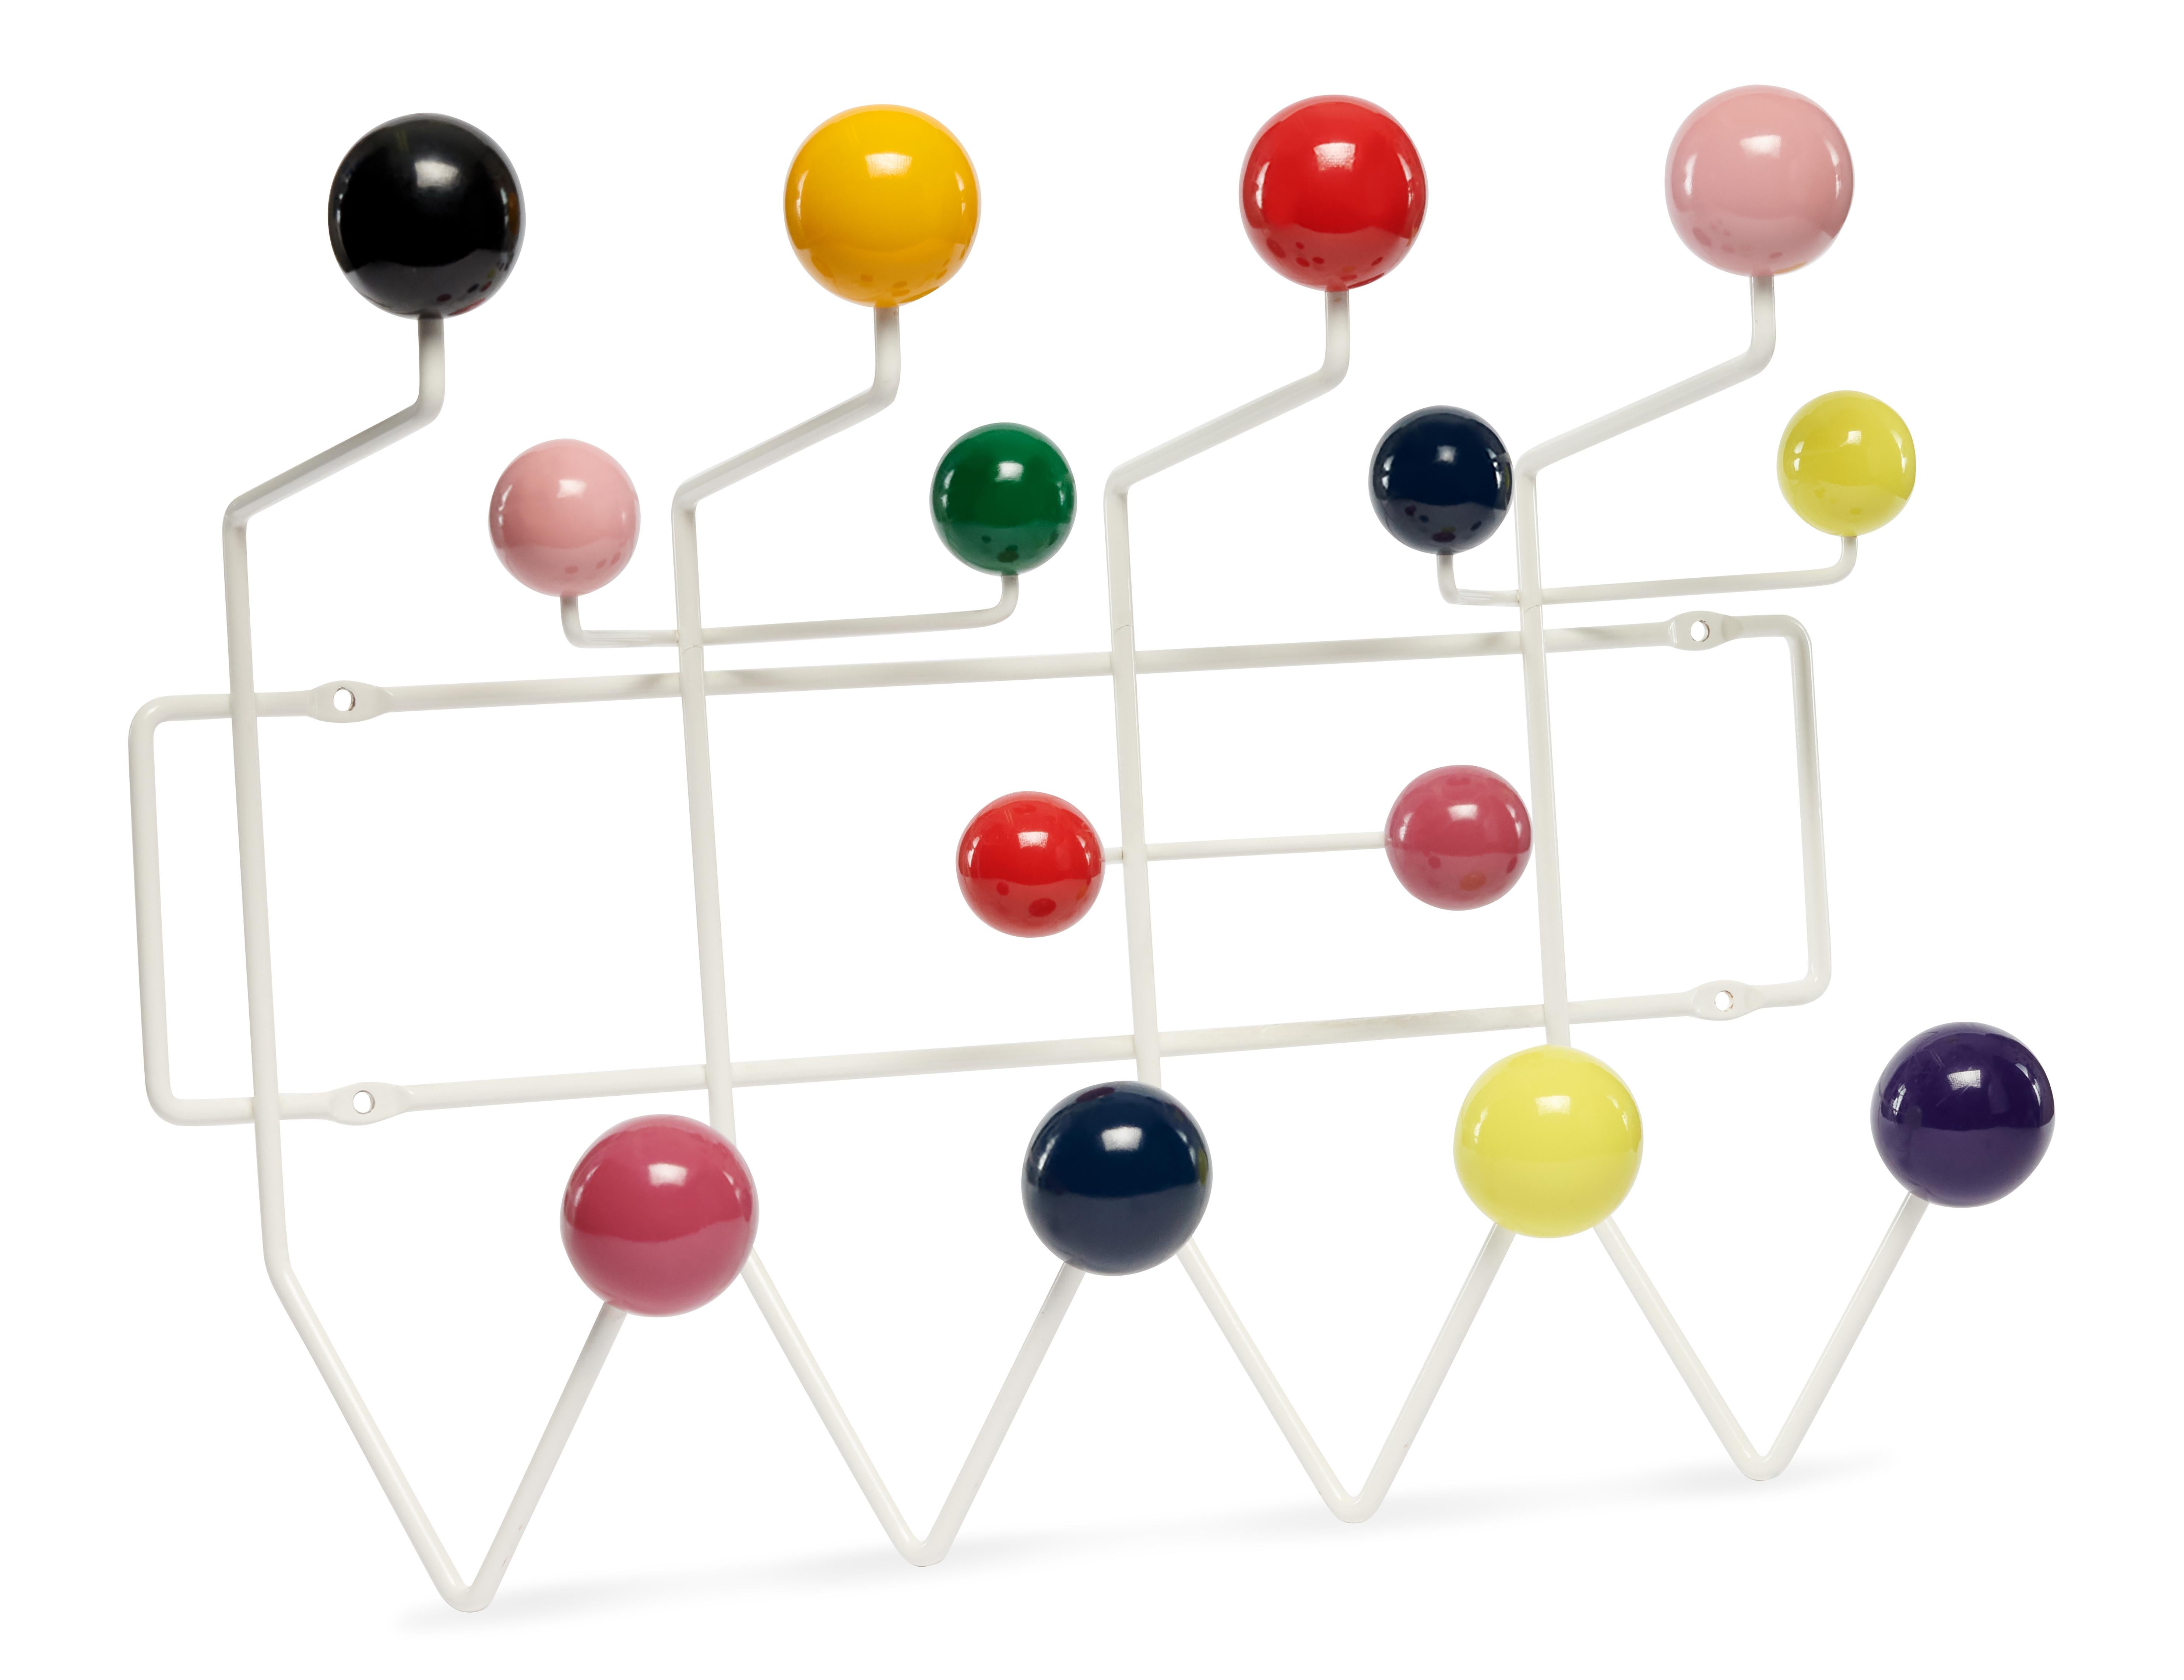 The Hang it All coat rack was first designed for children in 1953. An icon of mid-century design, it was originally designed to encourage children to hang up their belongings. It has become not only an object coveted by both children and adults